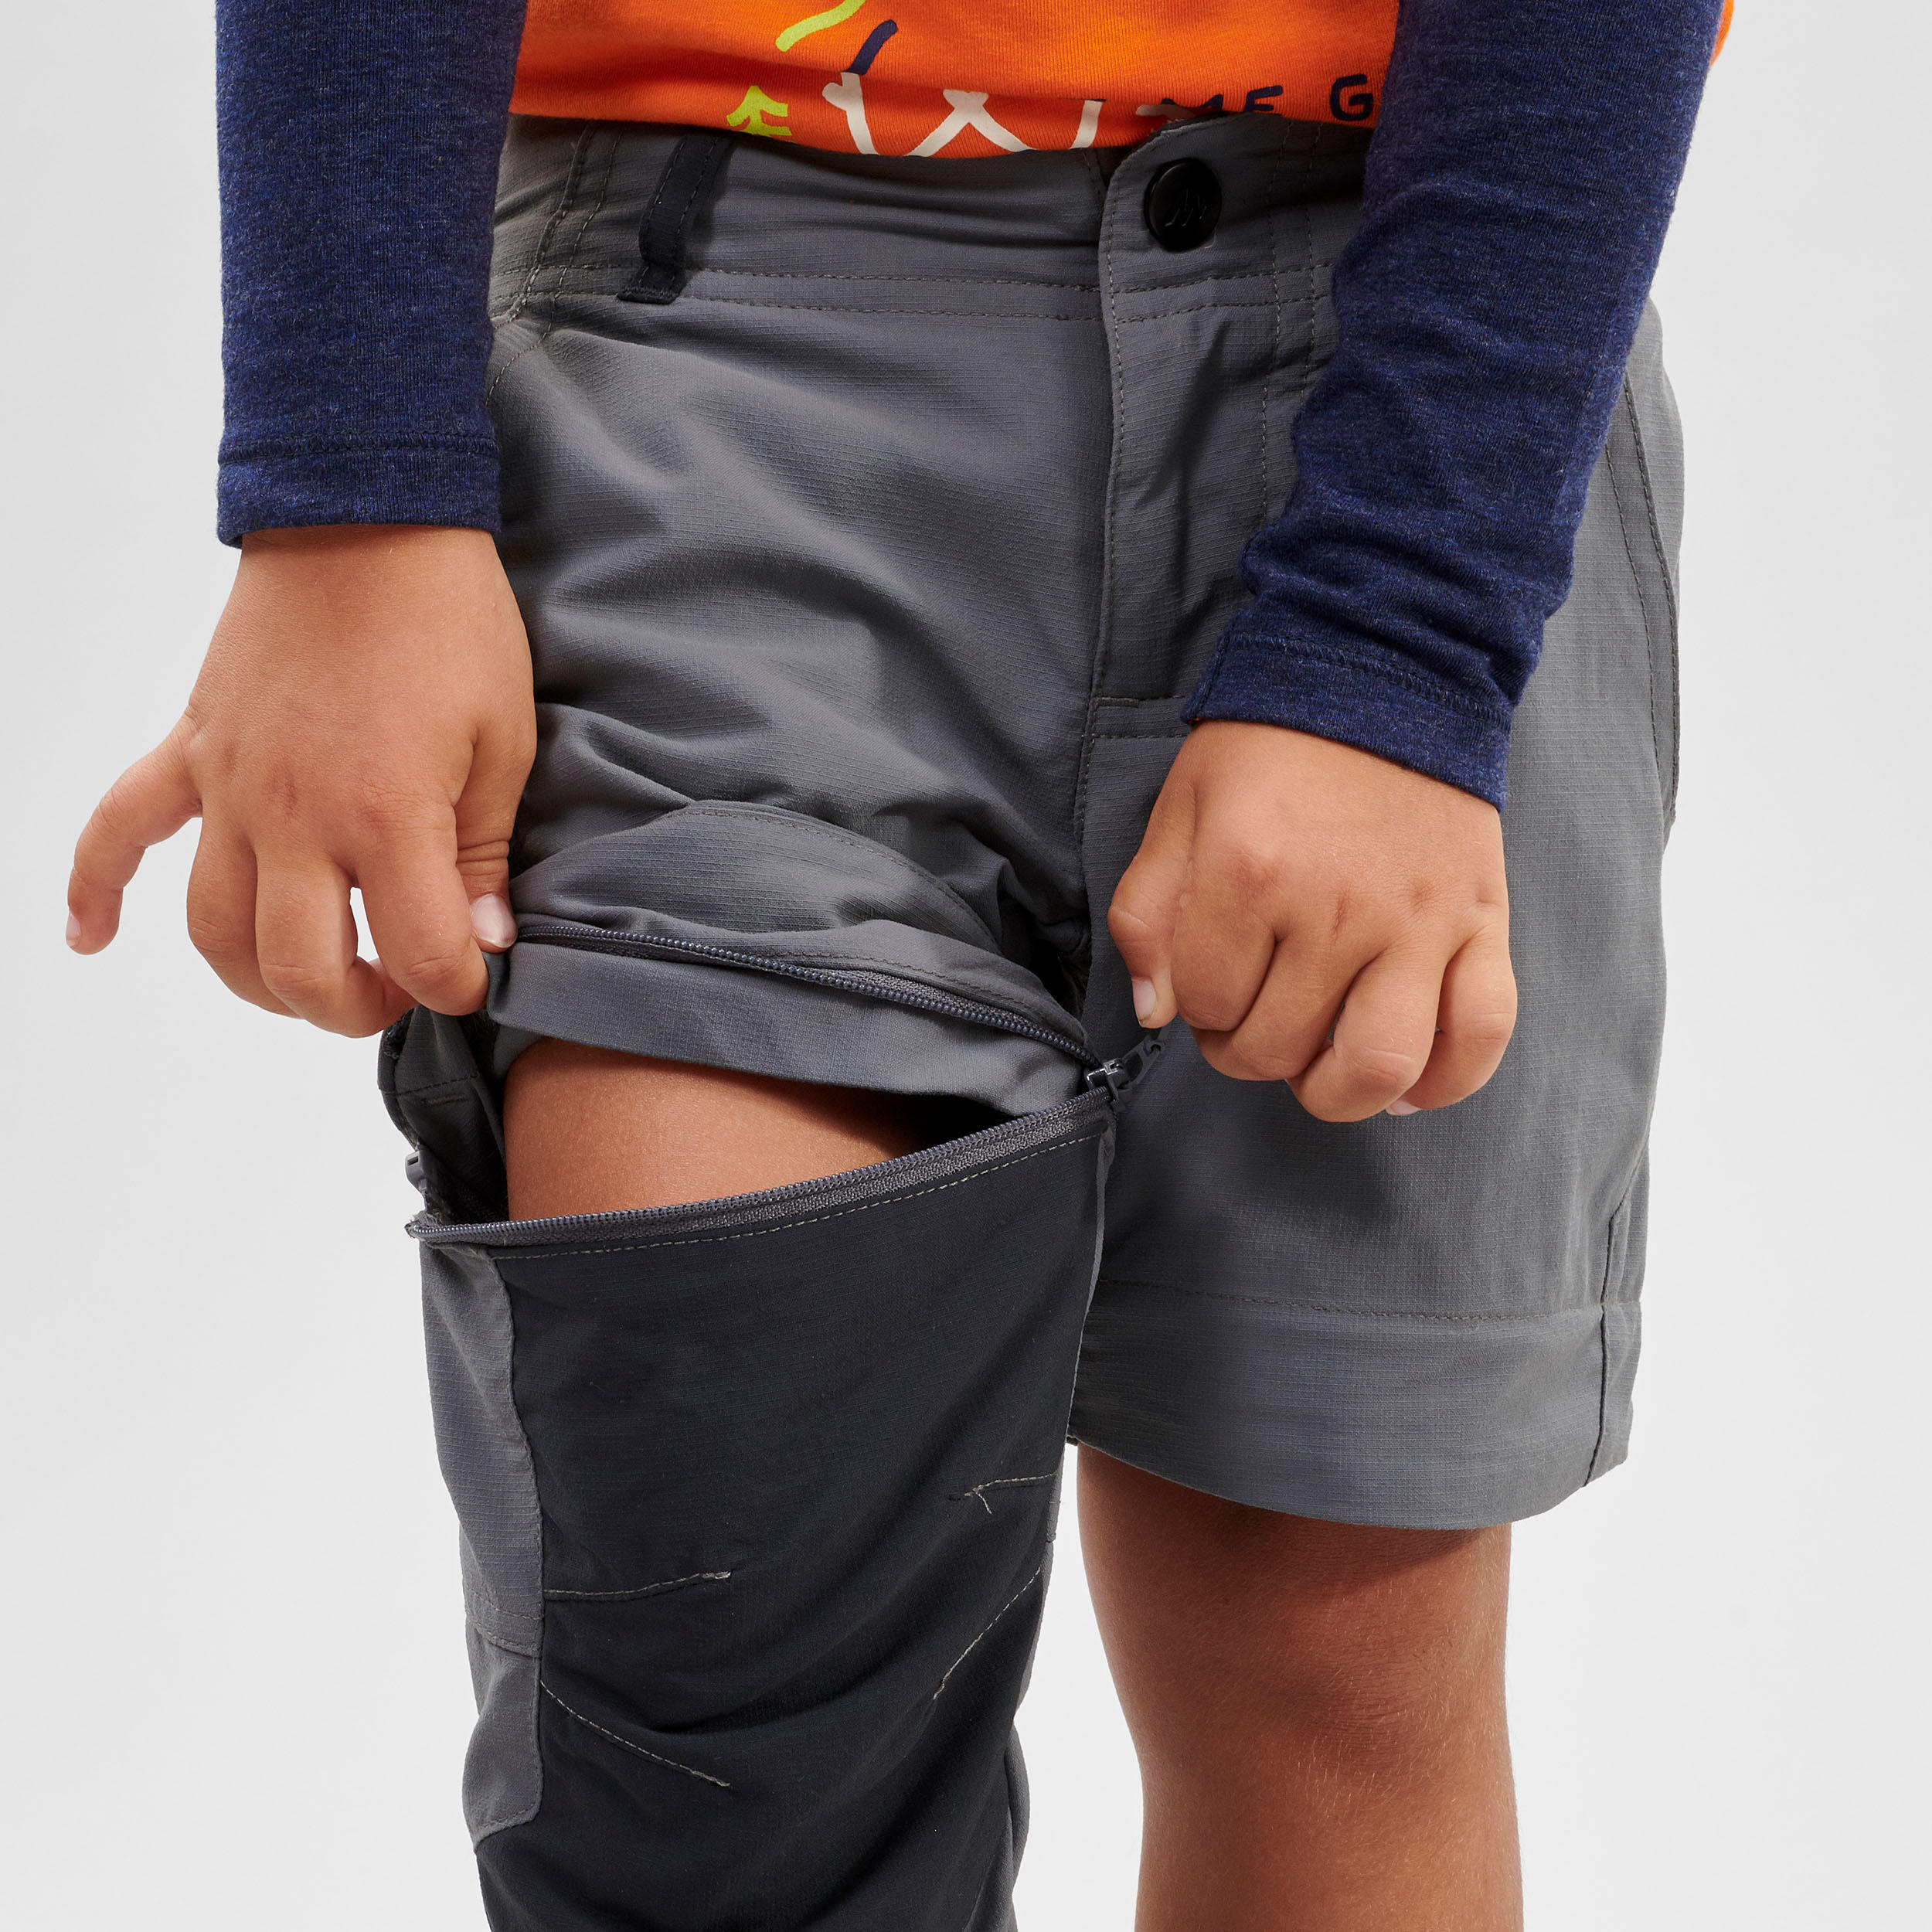 Kids' Hiking Zip-Off Trousers MH500 2-6 Years 8/14